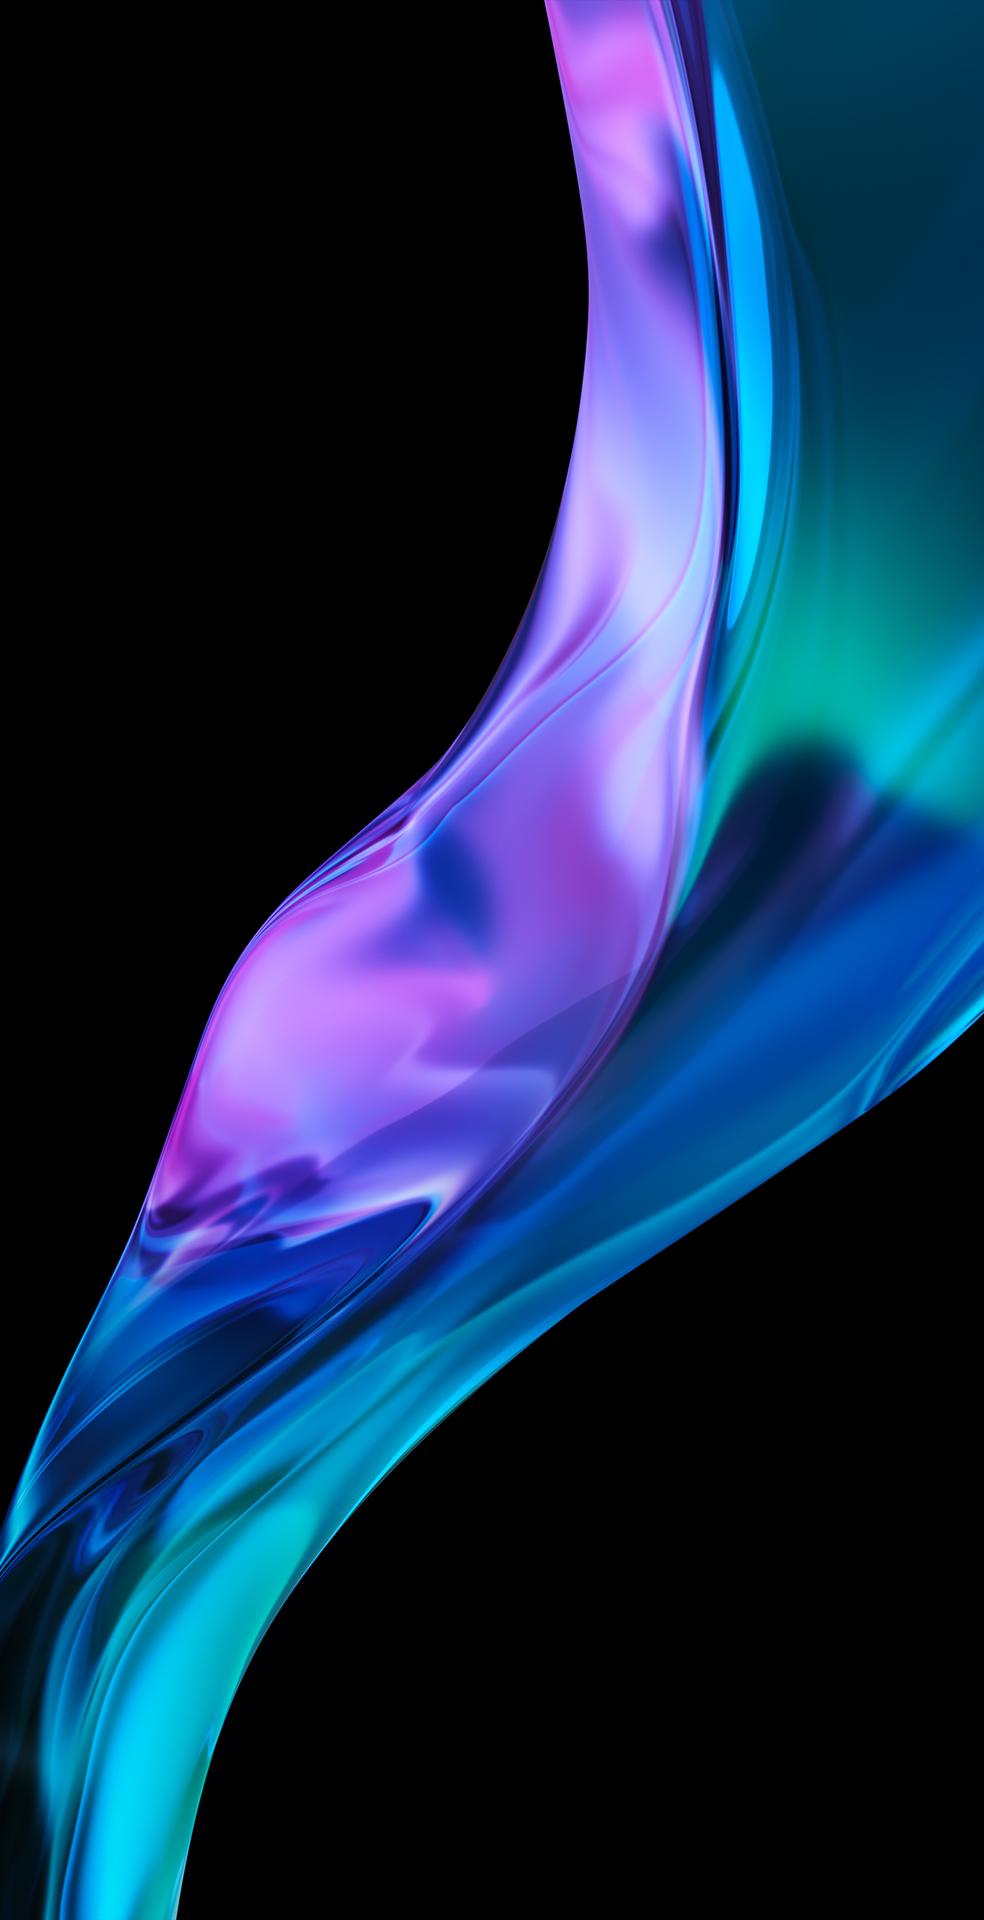 MIUI 10 Stock Wallpaper 07 - [1080x2160] | Mkbhd wallpapers, Stock wallpaper,  Oneplus wallpapers